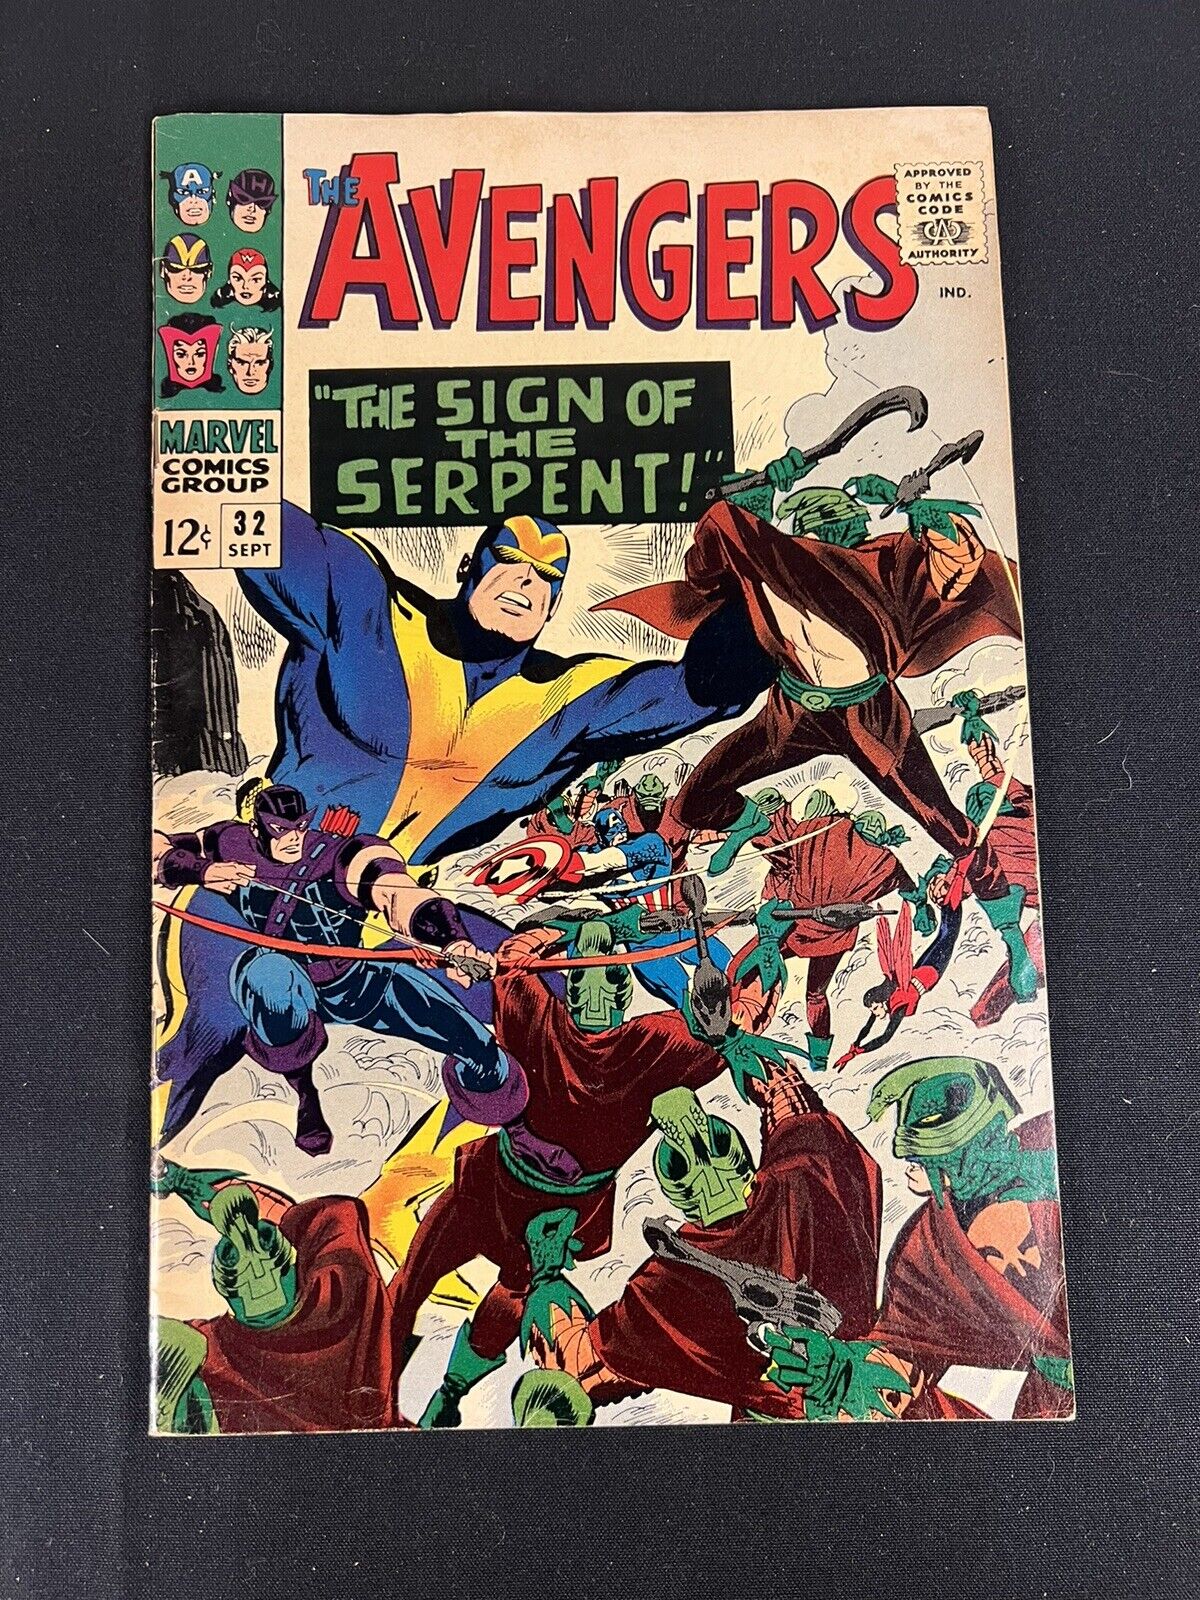 Avengers #32 First Appearance of Bill Foster aka Black Goliath Marvel 1966